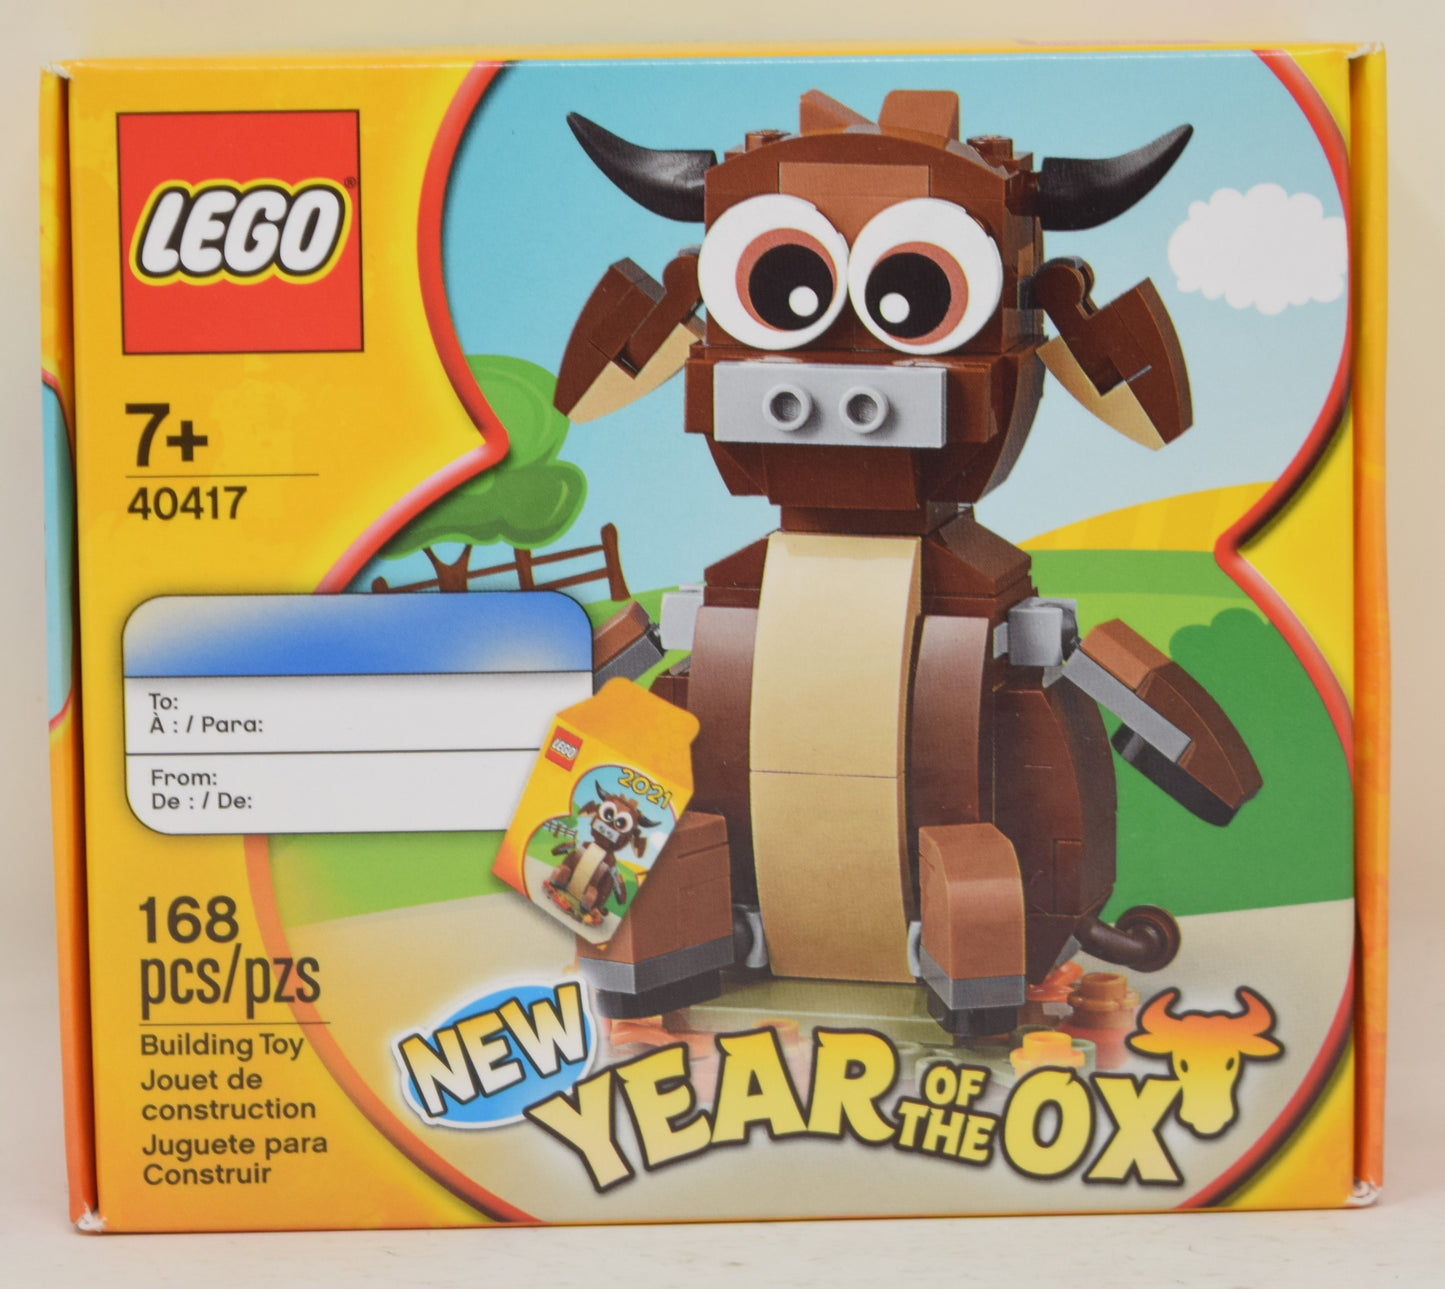 Lego Year Of The Ox Figure Set 40417 New